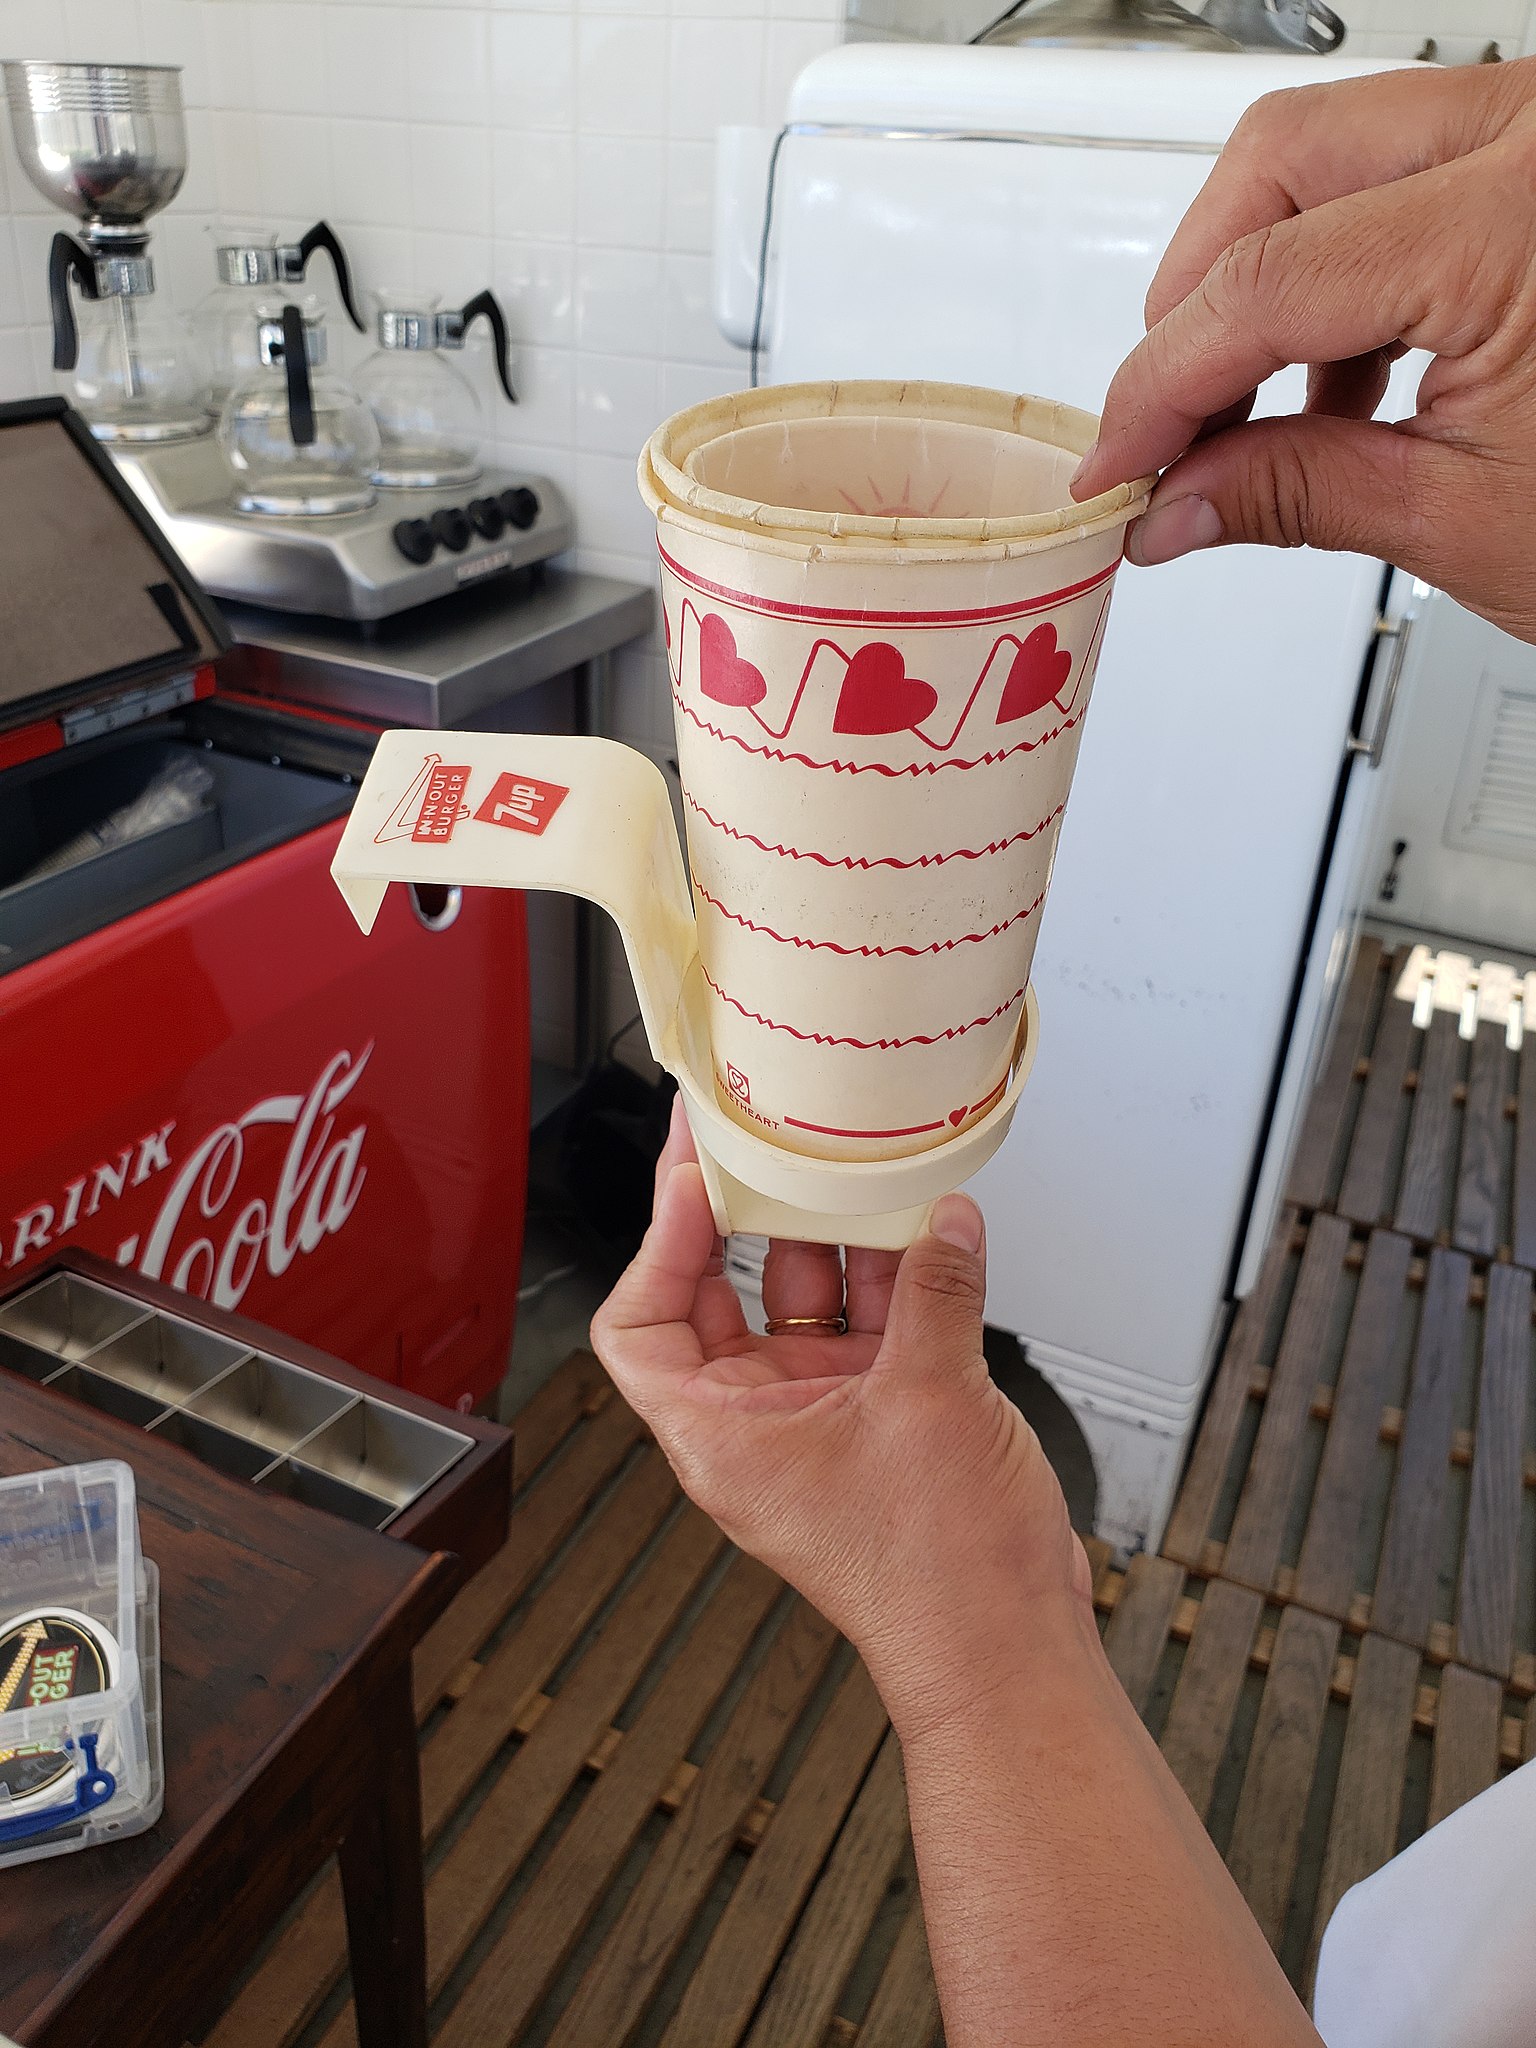 File:In-n-Out Burger Sweethart cup and cup holder.jpg - Wikimedia Commons